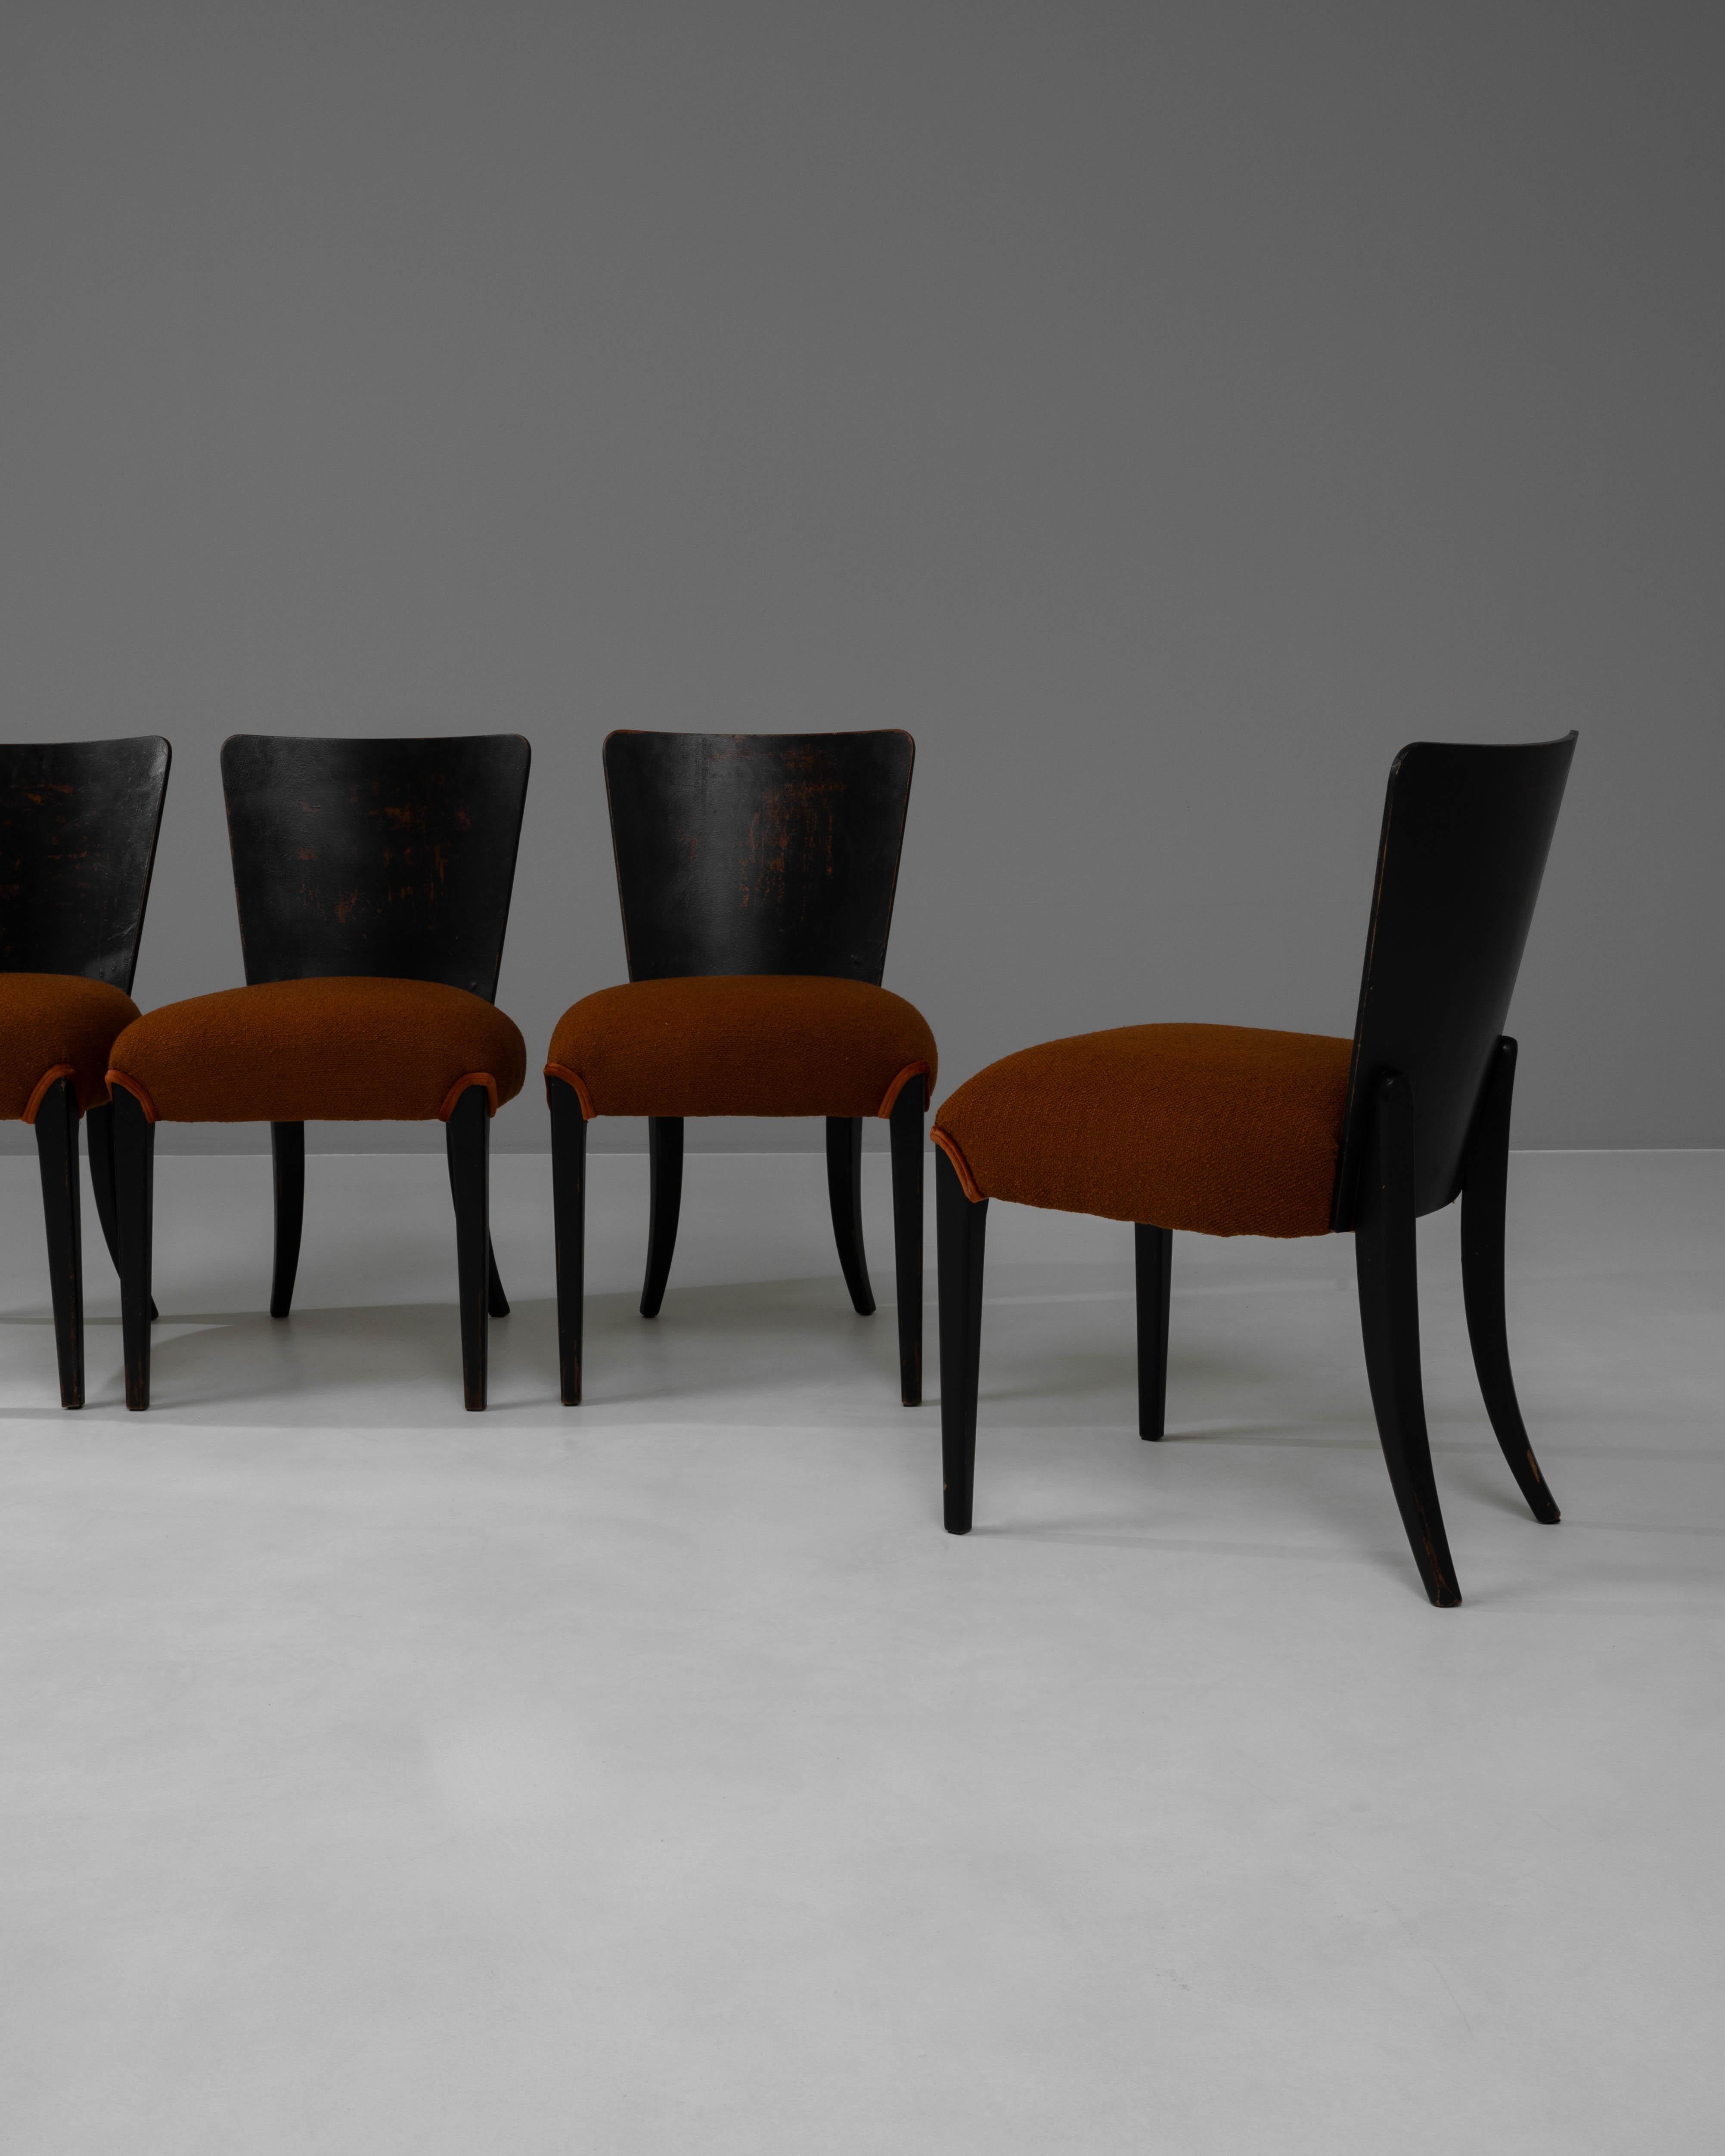 Upholstery 20th Century Czech Wooden Dining Chairs With Upholstered Seats By J. Halabala